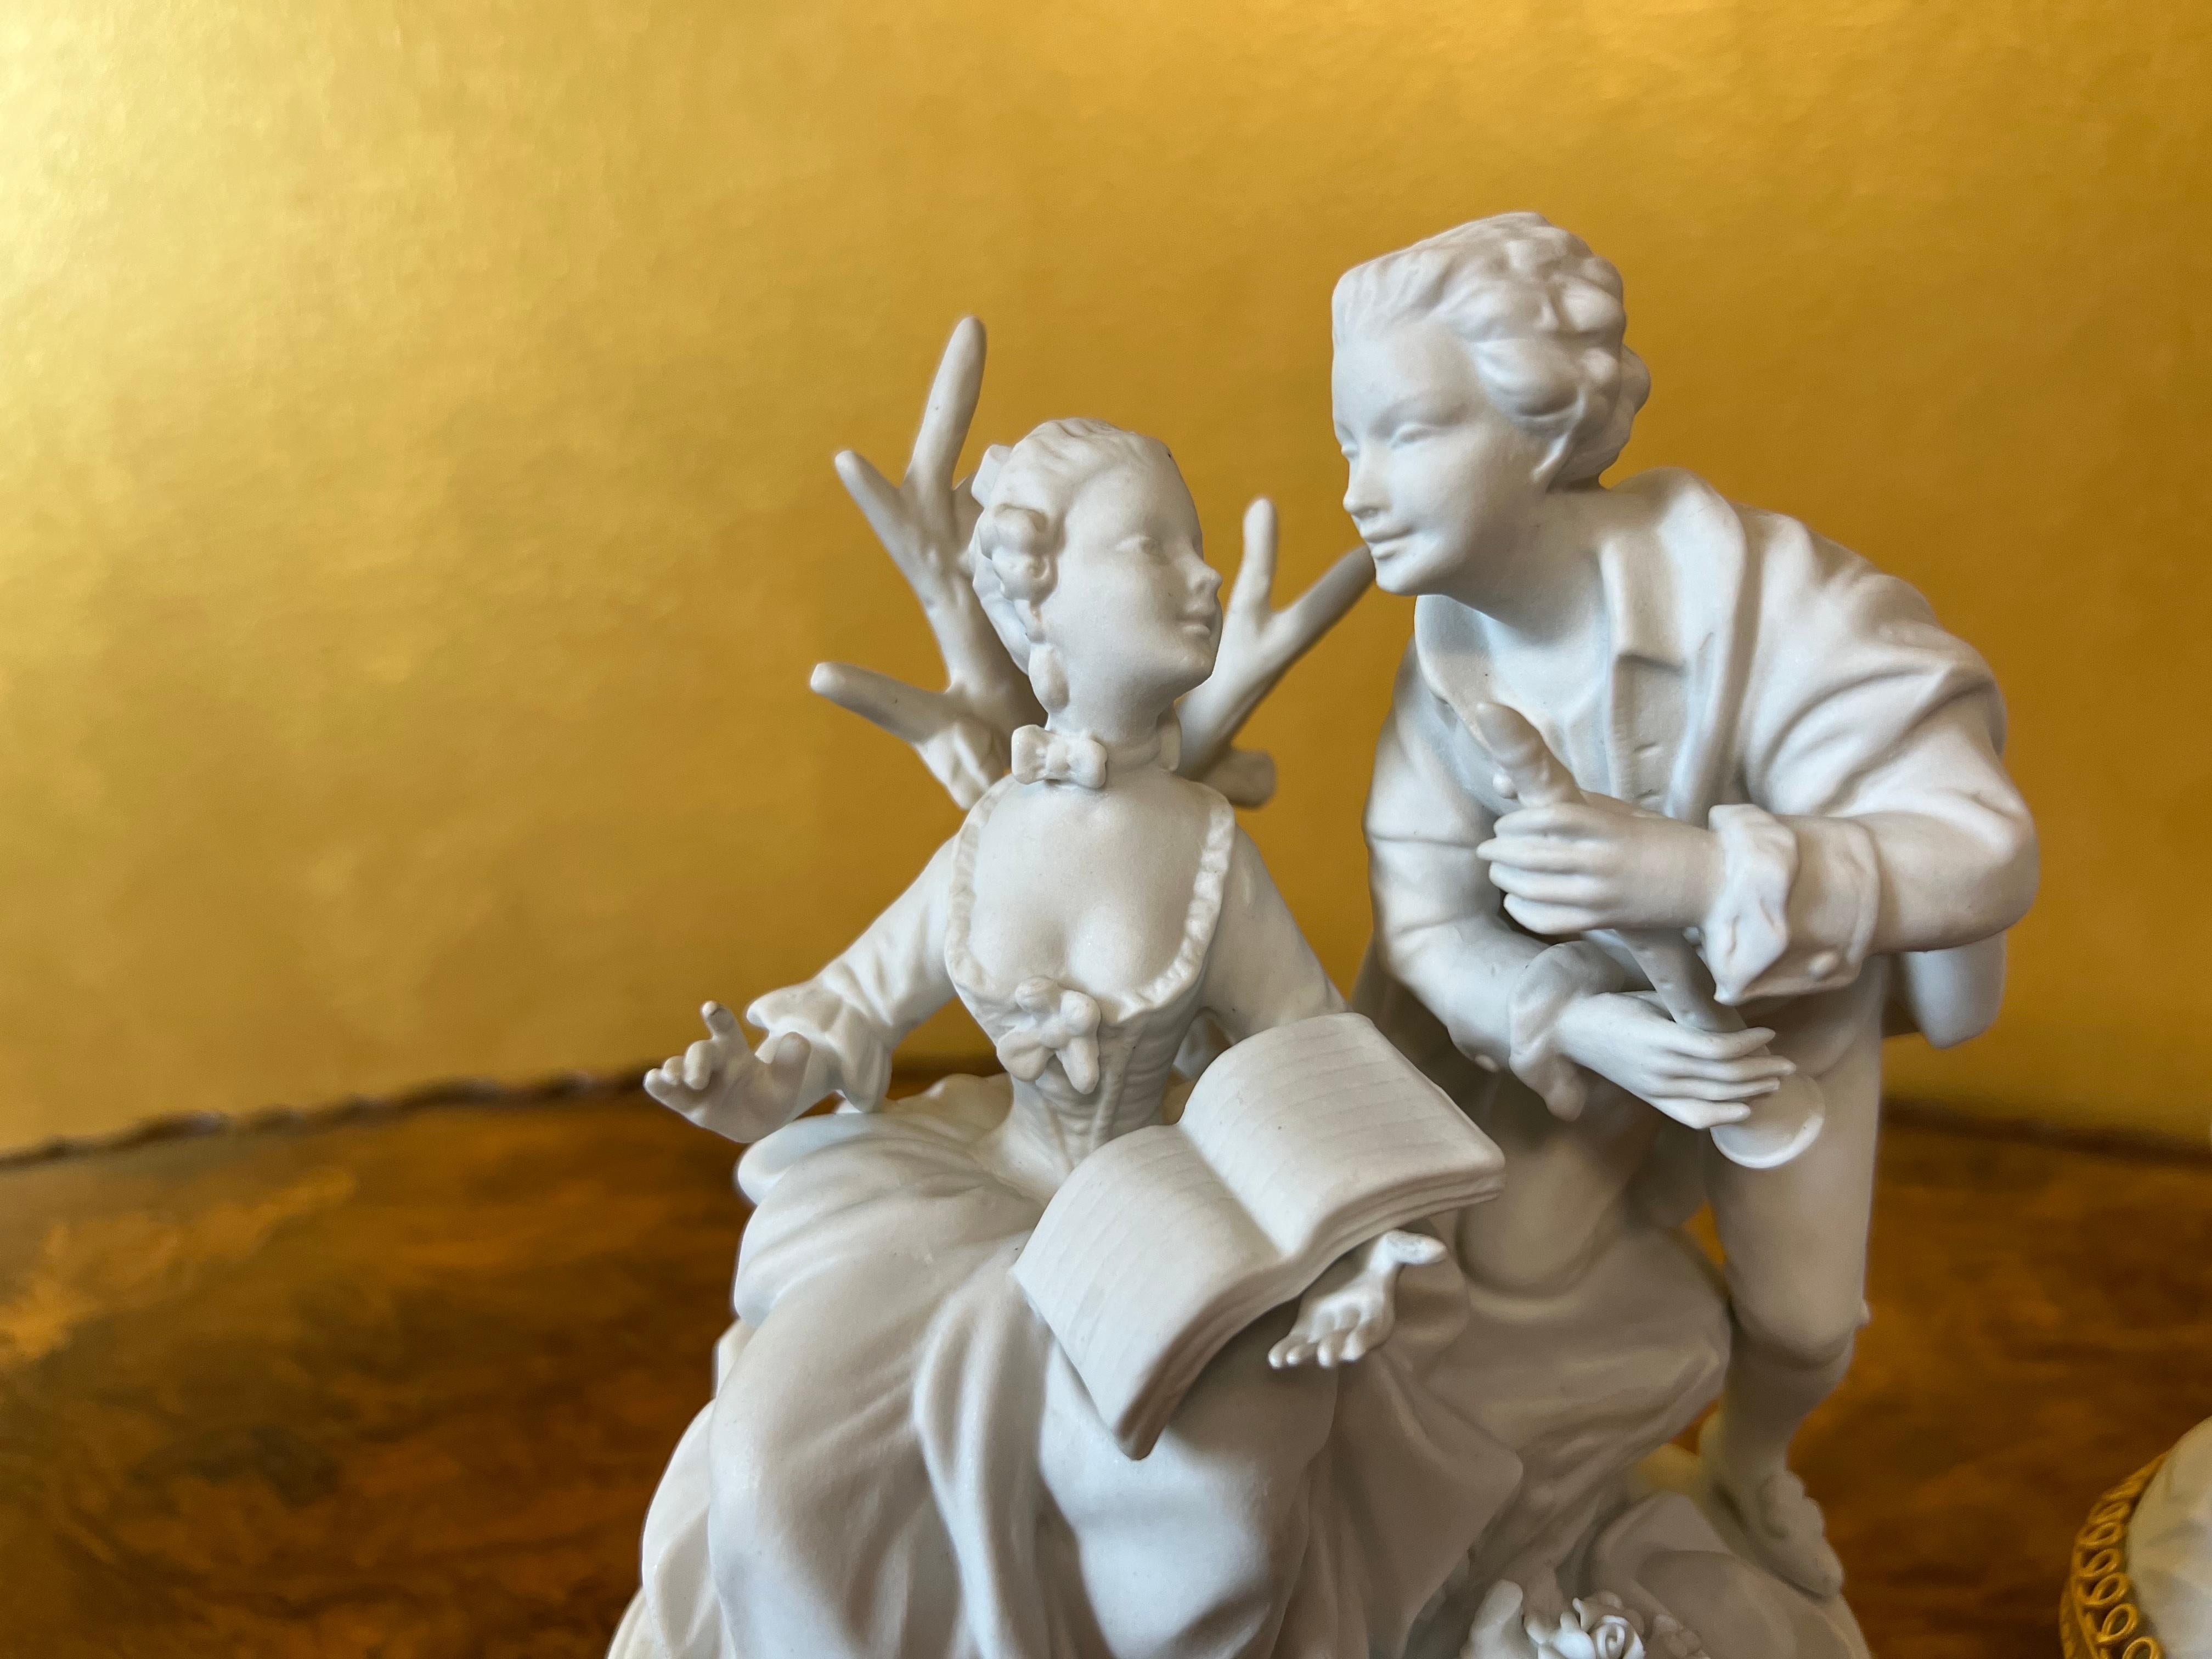 Pair of Statues of Man & Women playing instruments courting each other, one a gold metal stand, both have stamp on base.

Material: Porcelain

Country Of Origin: Germany 

Measurements 18cm high, 16cm length, 8cm width

Postage via Australia Post